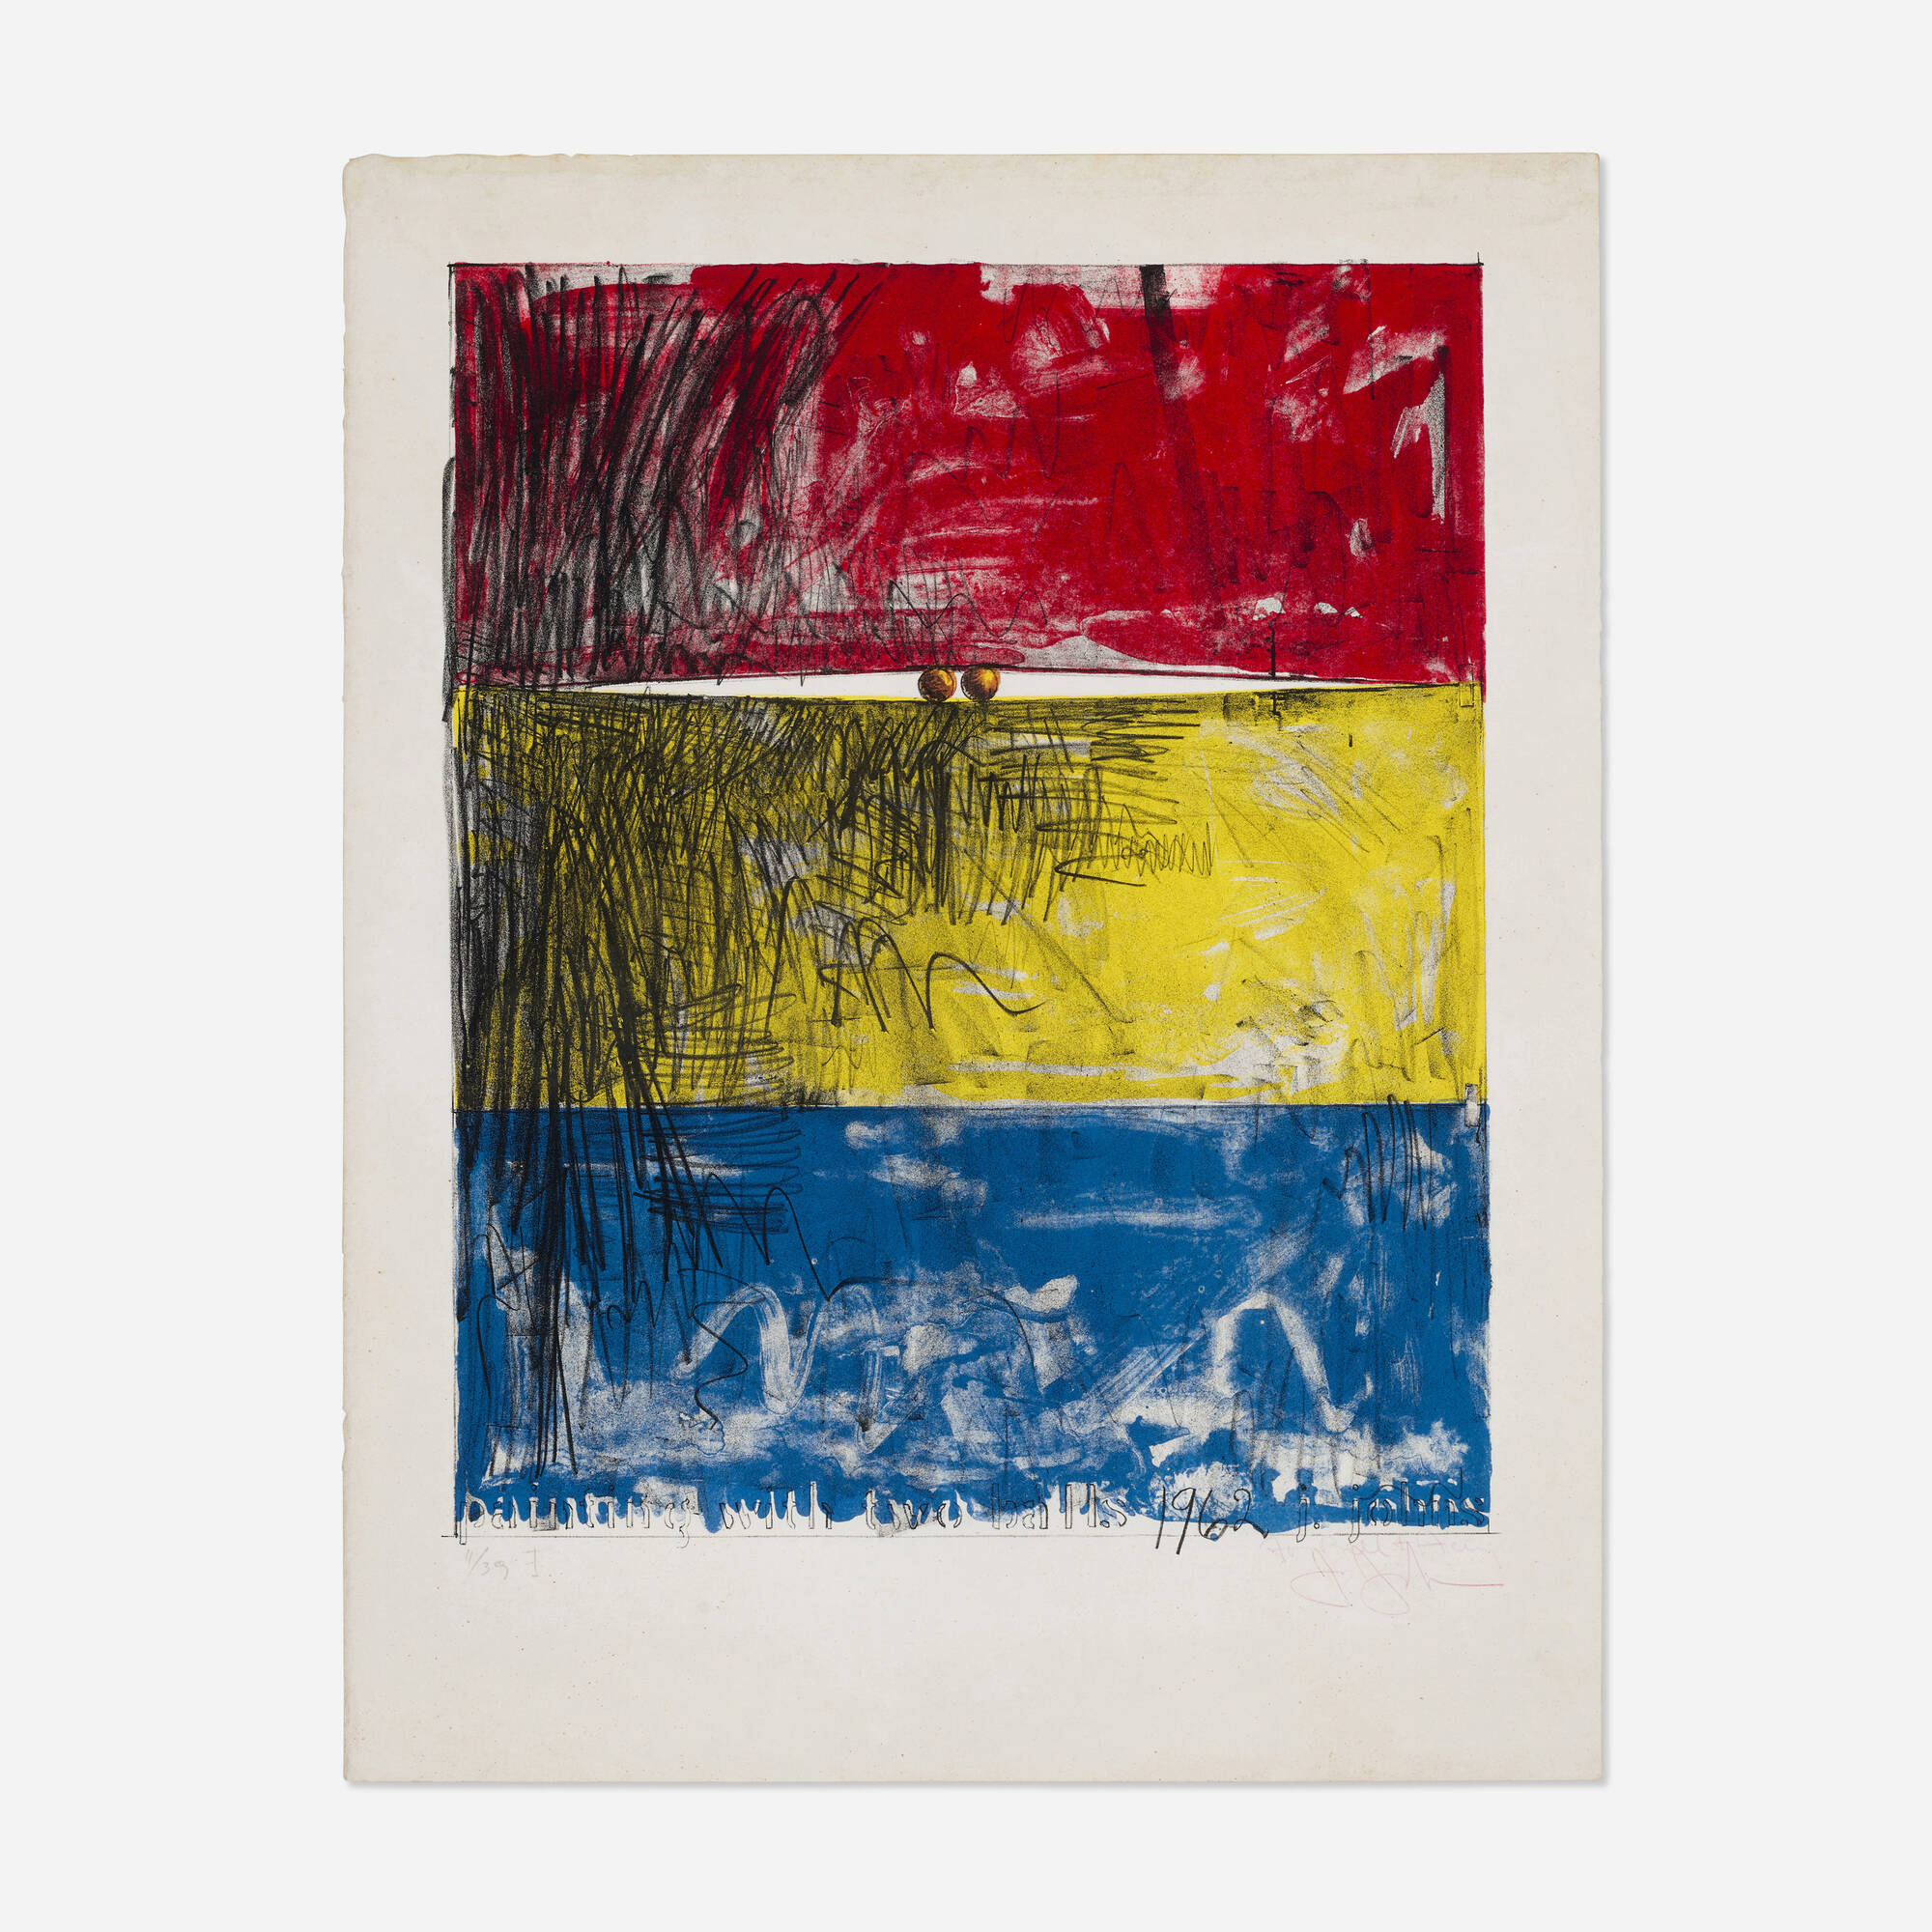 129: JASPER JOHNS, Painting with Two Balls I < The Acey and Bill 